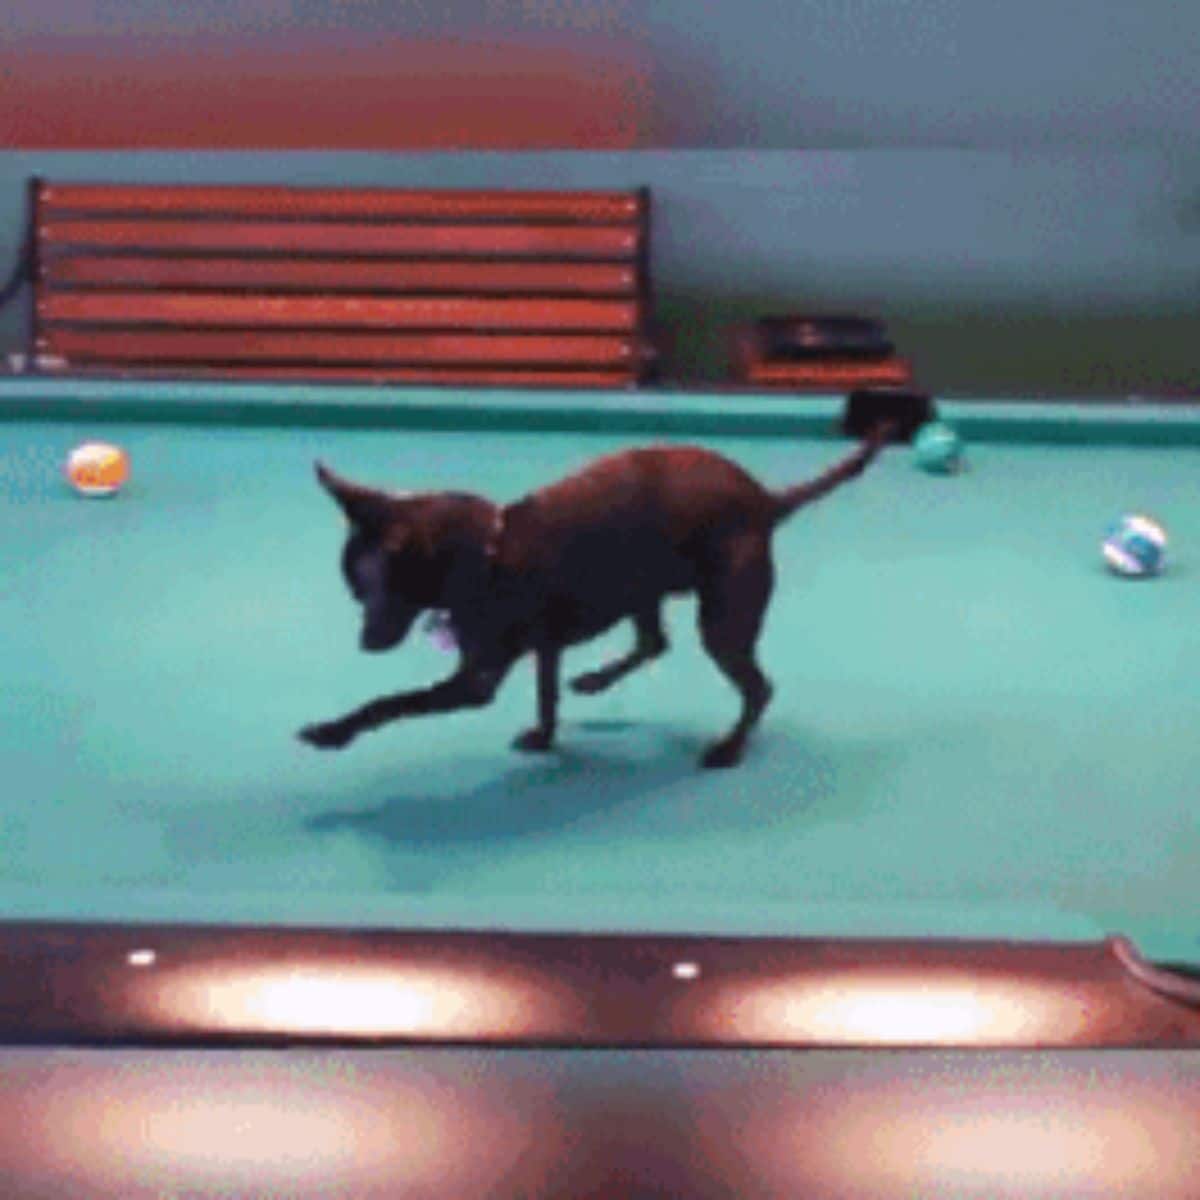 black chihuahua standing on a grene pool table and playing with the balls